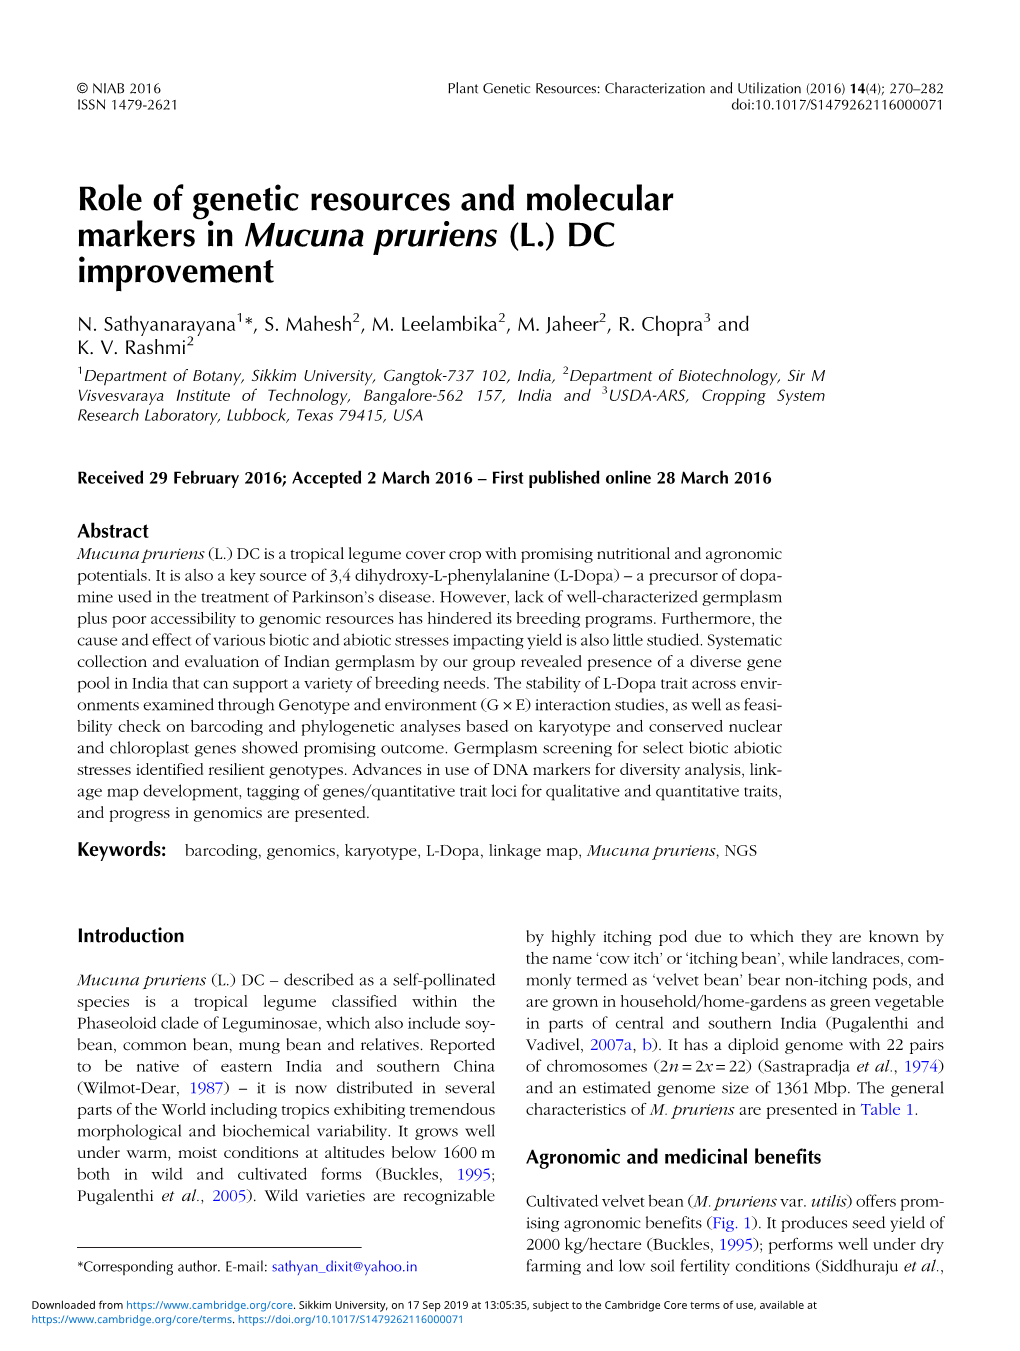 Role of Genetic Resources and Molecular Markers in Mucuna Pruriens (L.) DC Improvement